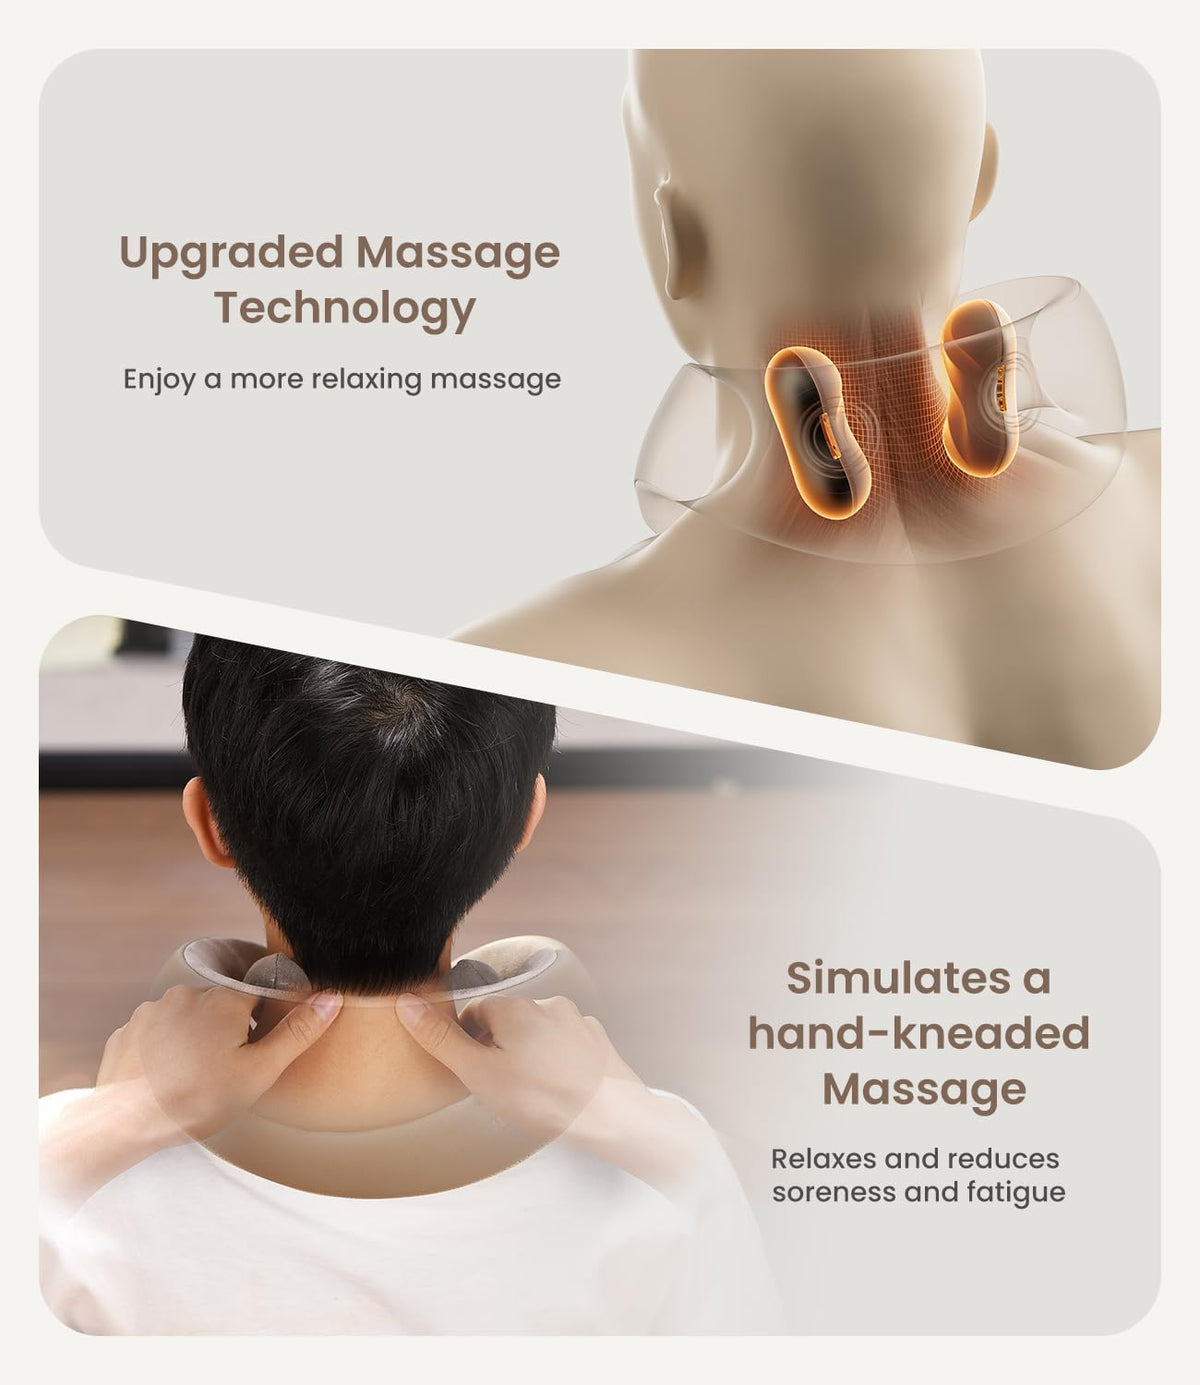 Illustration of a cordless neck massager highlighting its features. The top image showcases the back of a mannequin's neck with the U-Neck Mini Neck Shoulder Massager by Renpho EU positioned on it, demonstrating "Upgraded Massage Technology" with the text "Enjoy a more relaxing massage." The bottom image depicts the back of a person's neck with the U-Neck Mini Neck Shoulder Massager by Renpho EU on, emphasizing "Simulates a hand-kneaded Massage" with the text "Rel